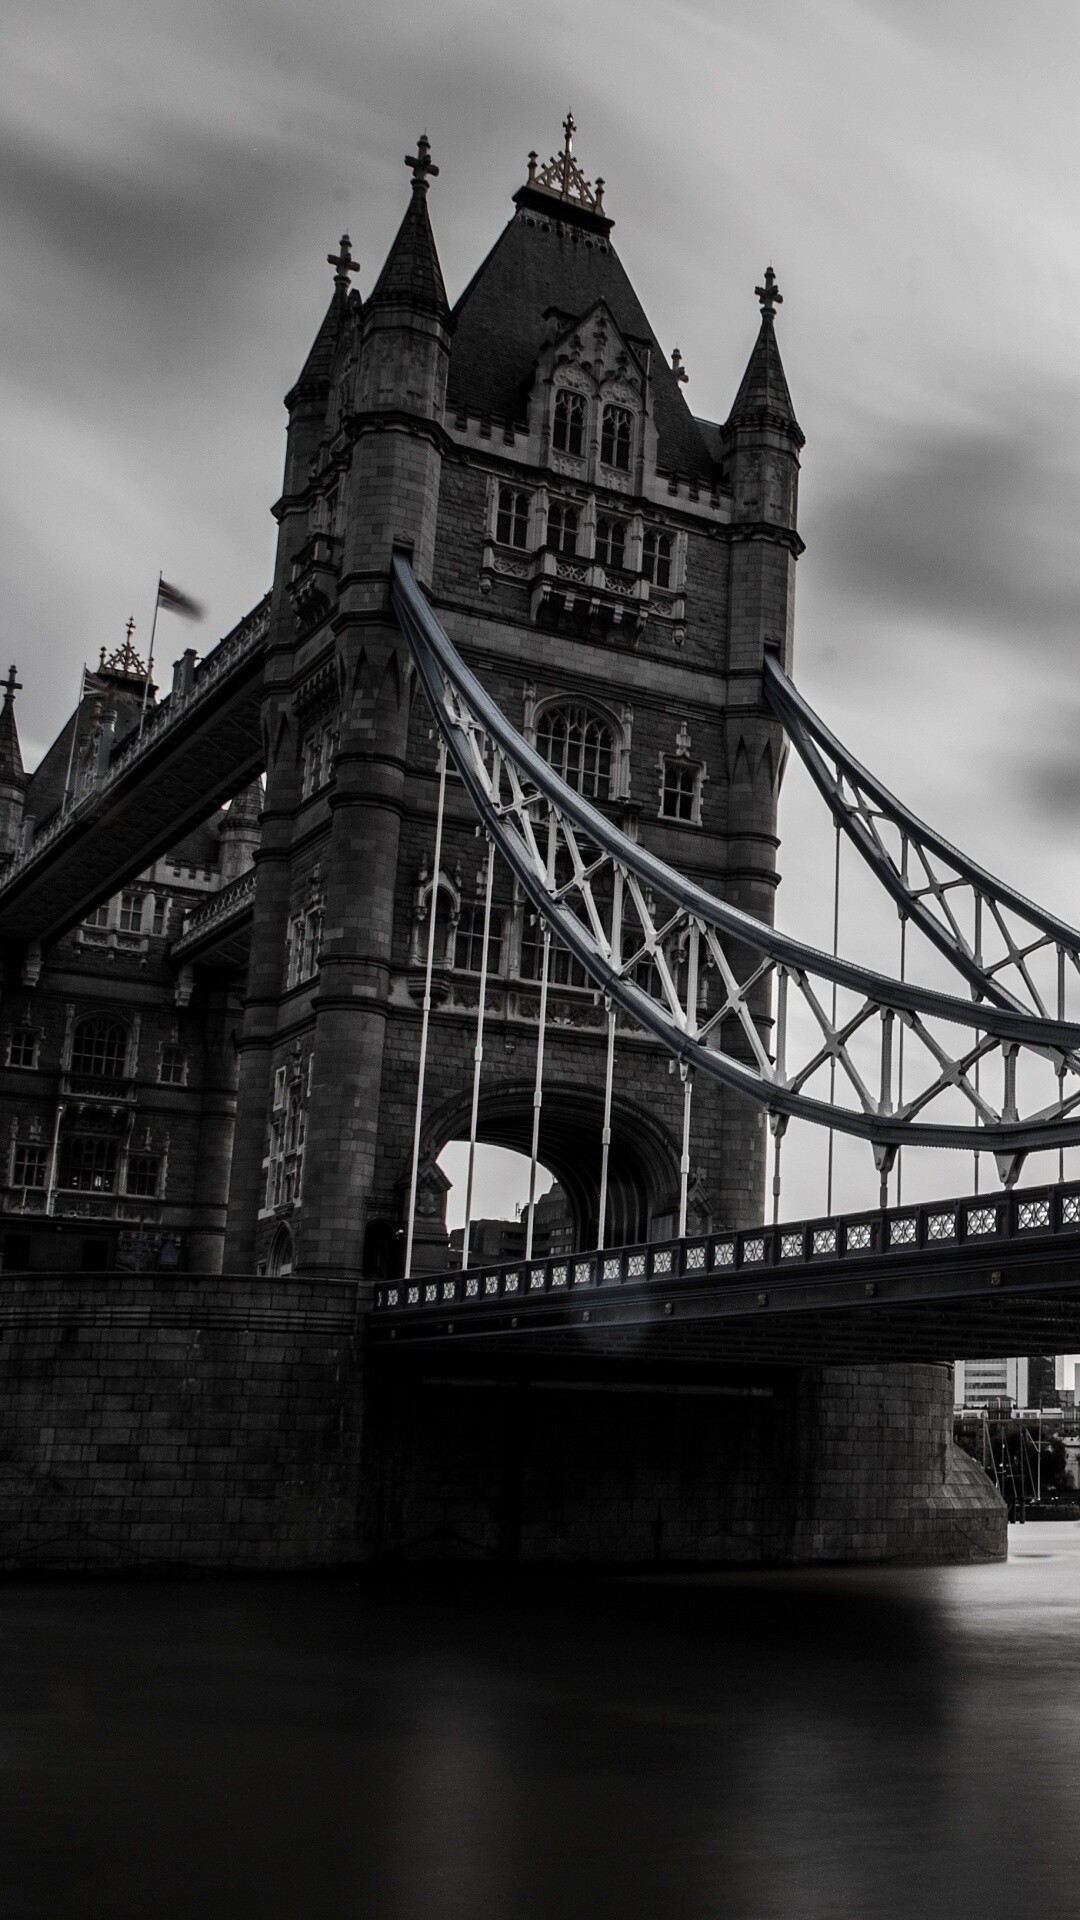 Tower Bridge: The only bridge over the Thames that can be raised. 1080x1920 Full HD Wallpaper.